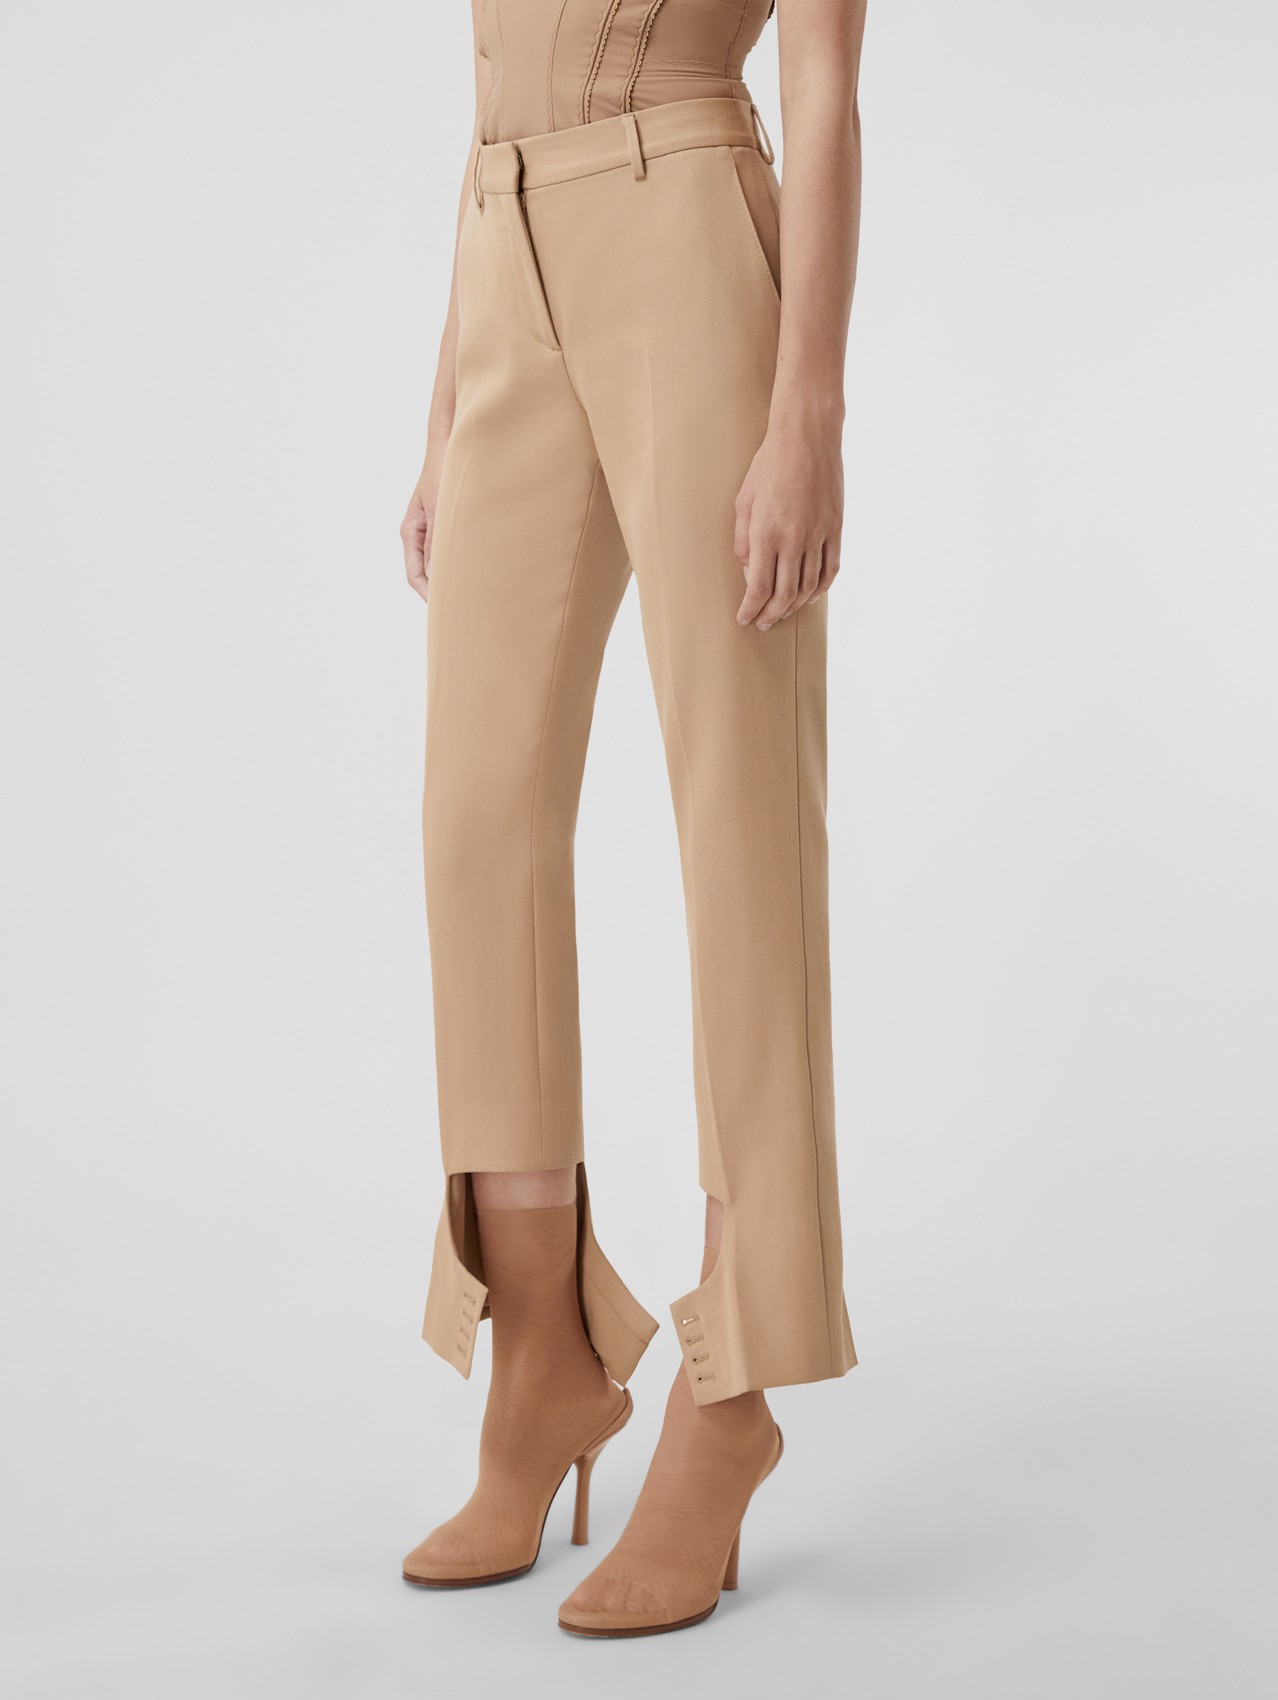 Cut-out Detail Grain De Poudre Wool Tailored Trousers in Dark Biscuit